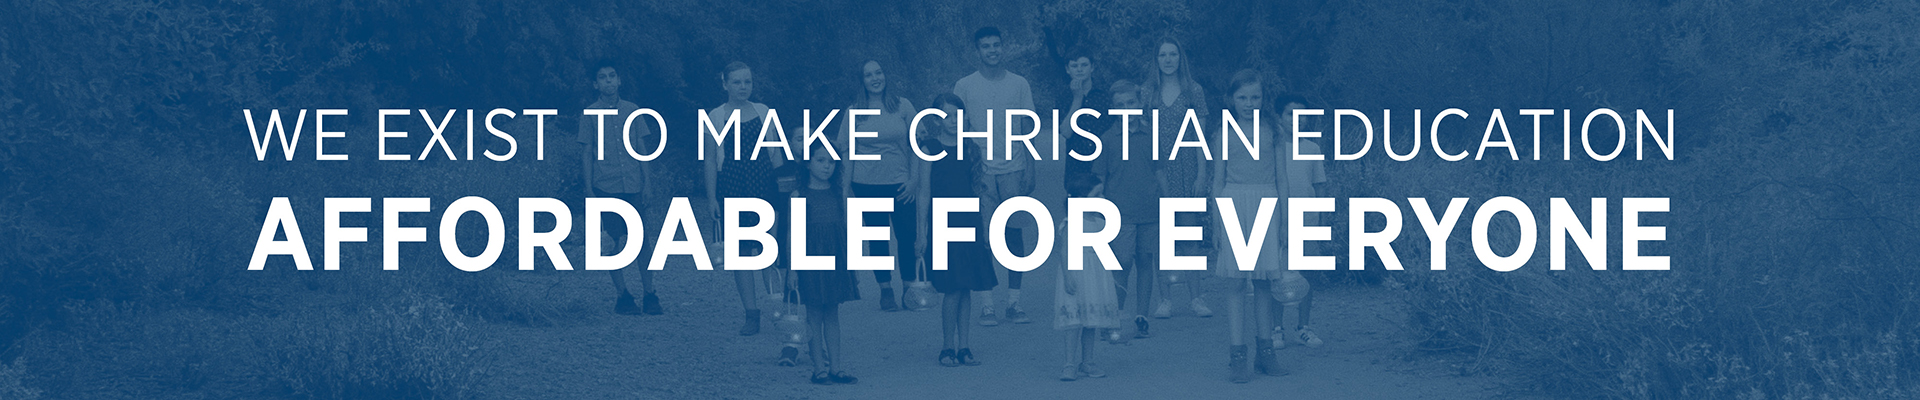 We exist to make Christian Education affordable for everyone